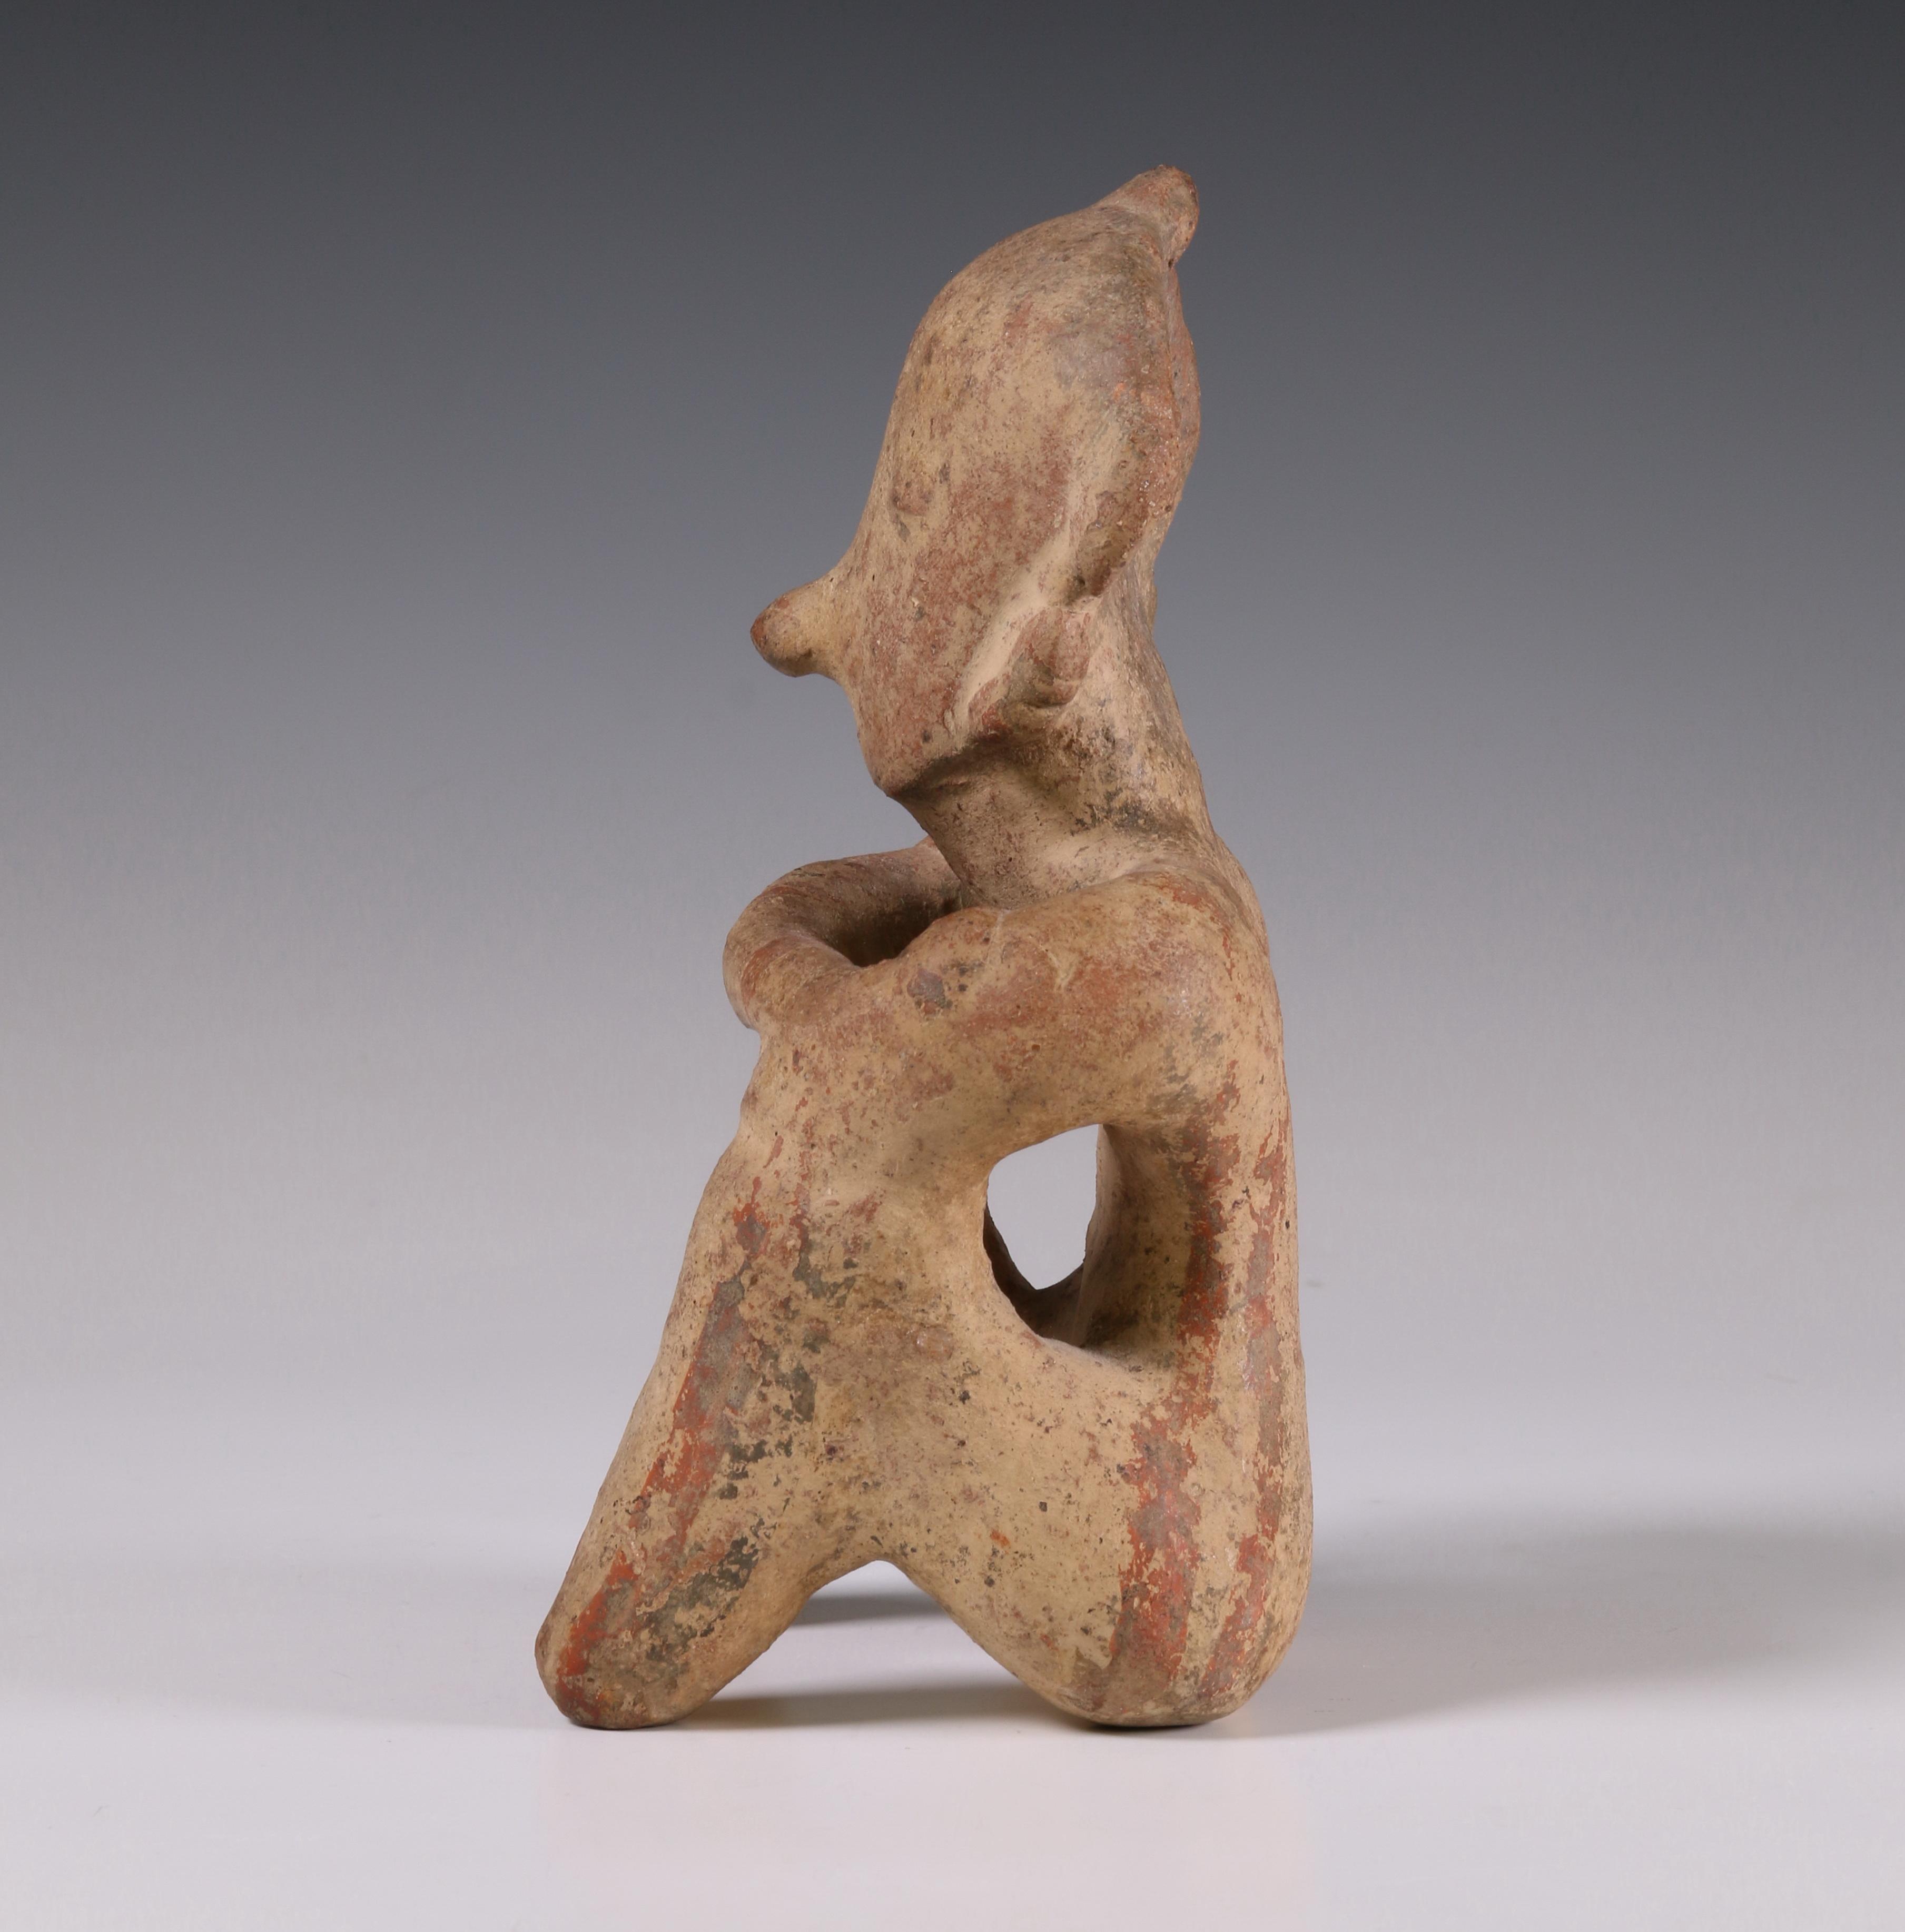 West-Mexico, Nayarit, terracotta seated figure with crossed arms in Chinesco style, 200 BC - 100 AD. - Image 5 of 7